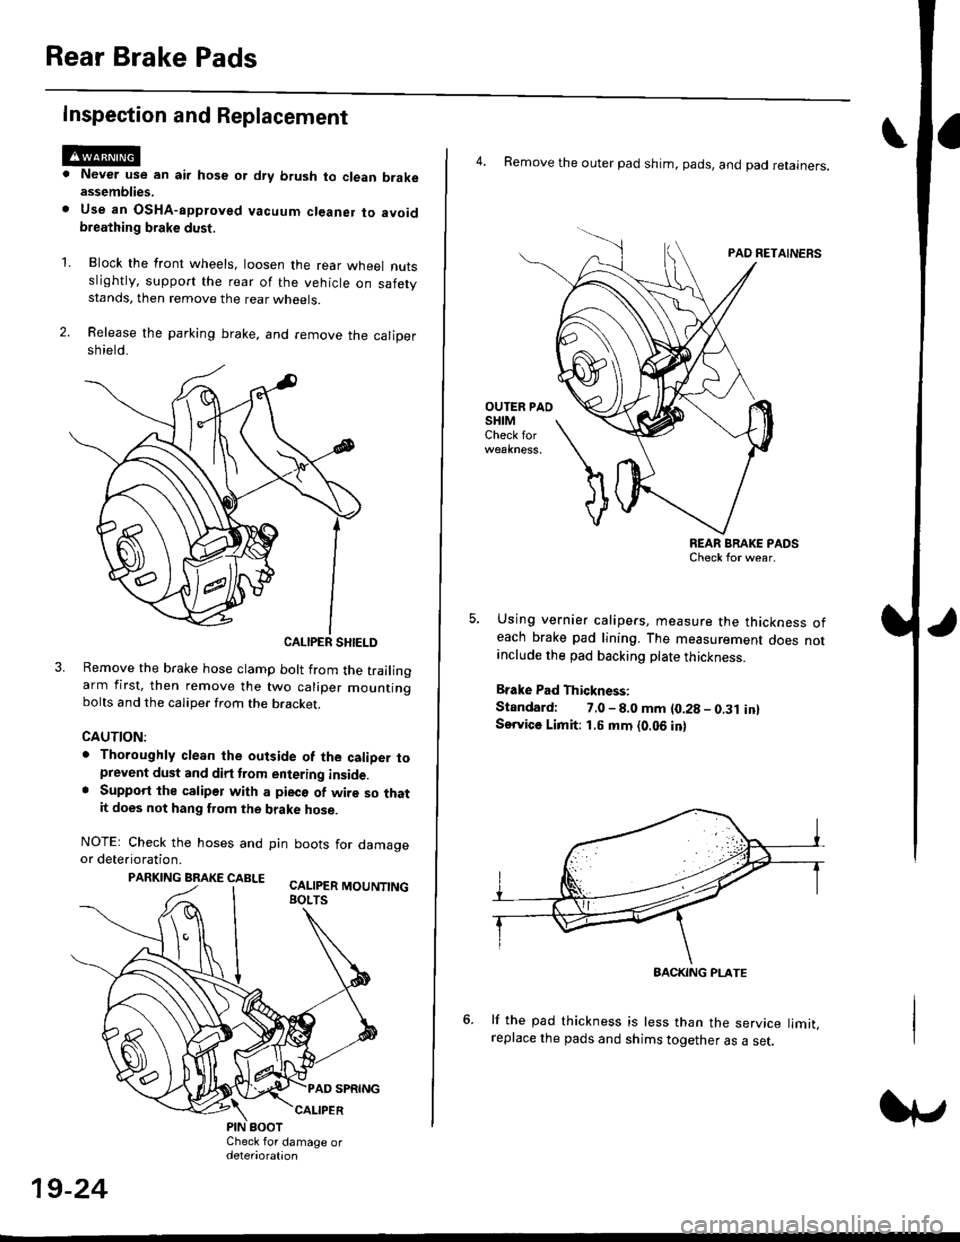 HONDA CIVIC 1997 6.G Workshop Manual Rear Brake Pads
Inspection and Replacement
Never use an air hose or dry brush to clean brakeassemblies.
Use an OsHA-apptoved vacuum cl€aner to avoidbreathing brake dust,
Block the front wheels, loos